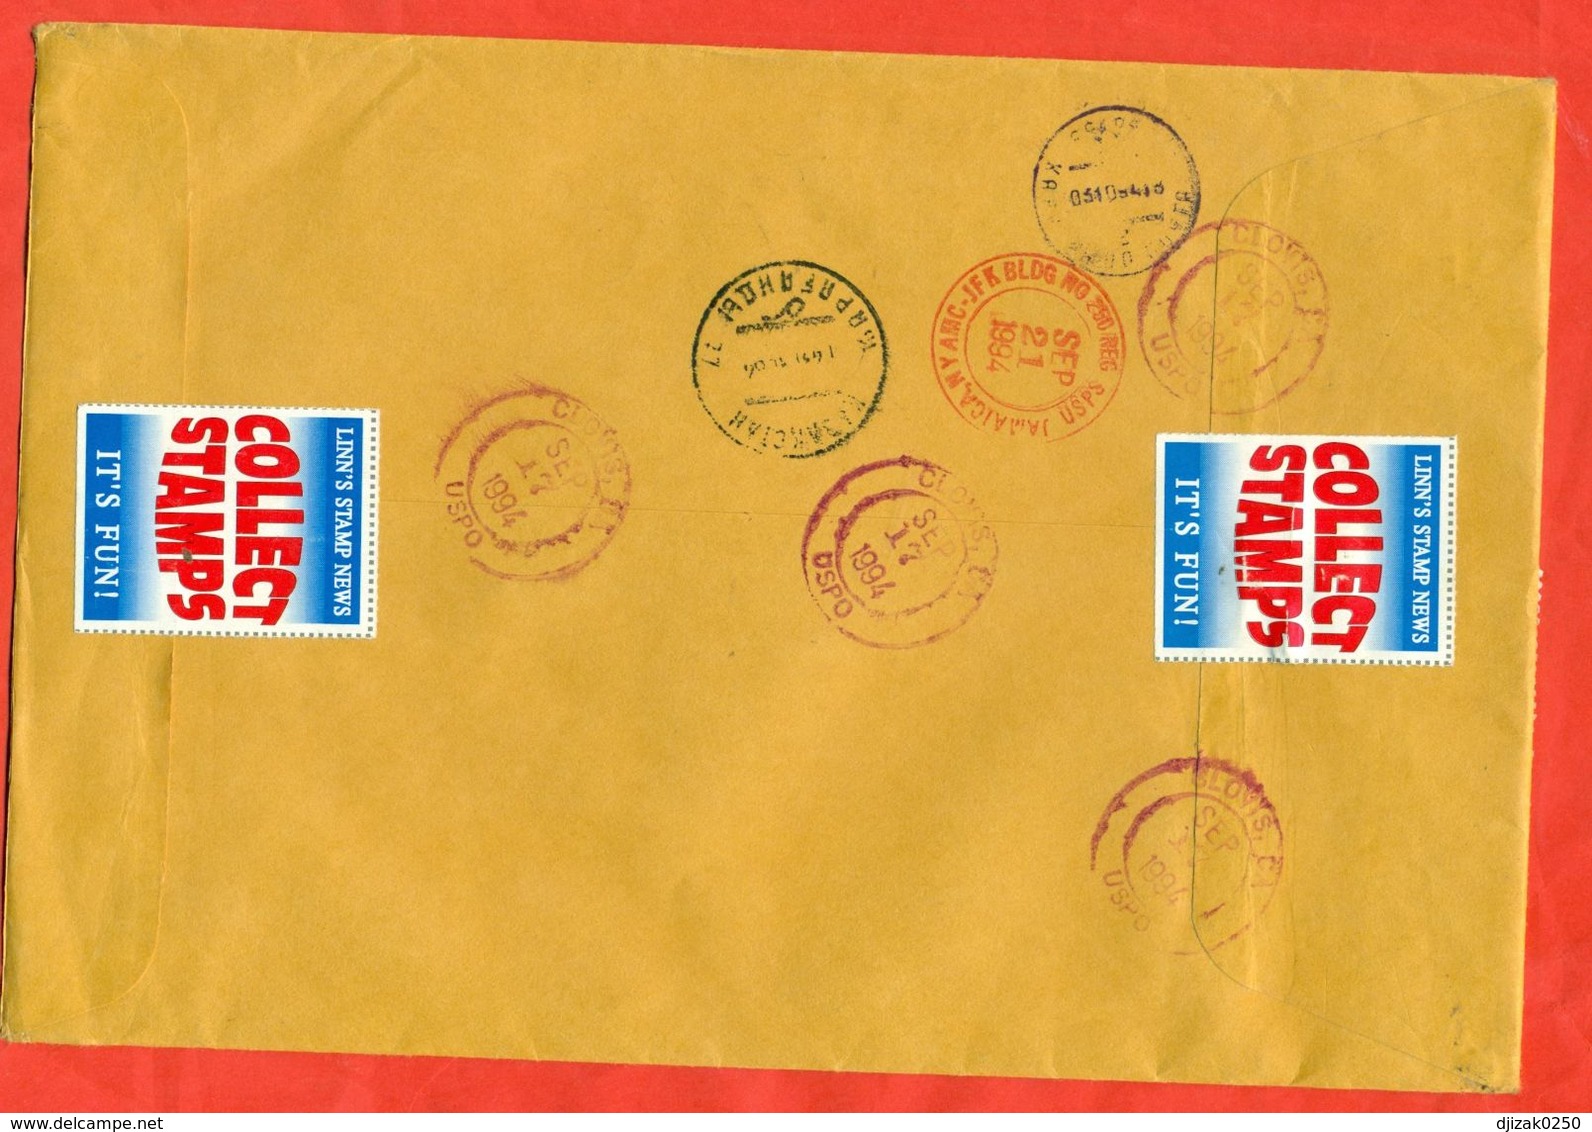 USA 1994.Football. Registered Envelope Passed The Mail. - Covers & Documents